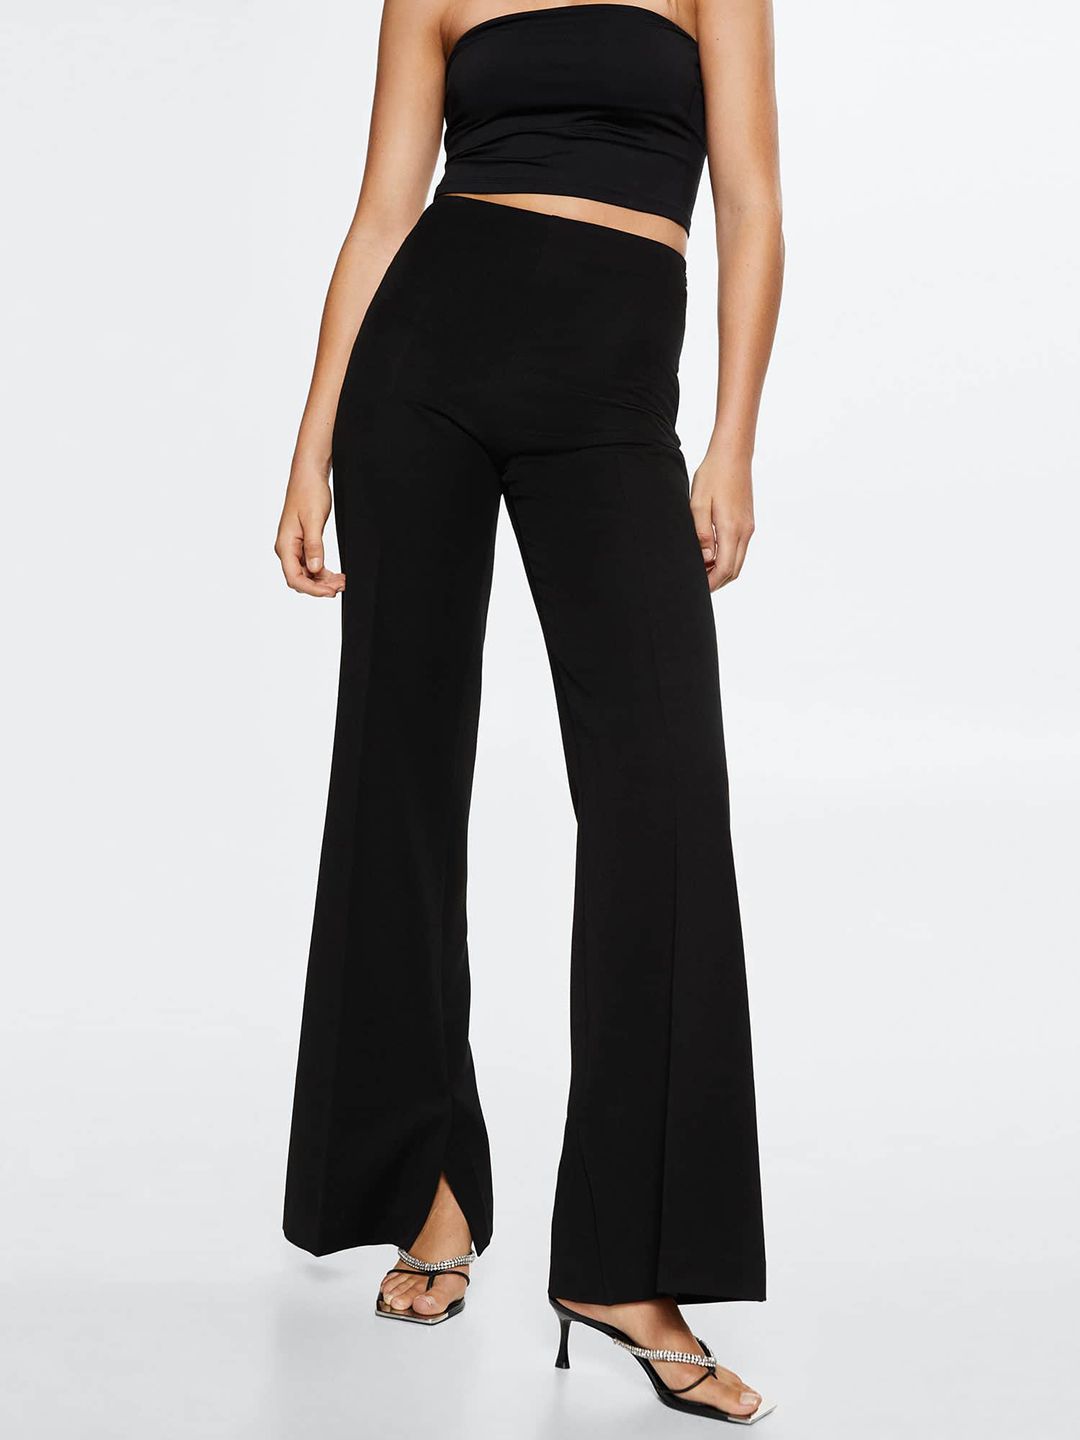 MANGO Women Black Flared High-Rise Sustainable Trousers Price in India